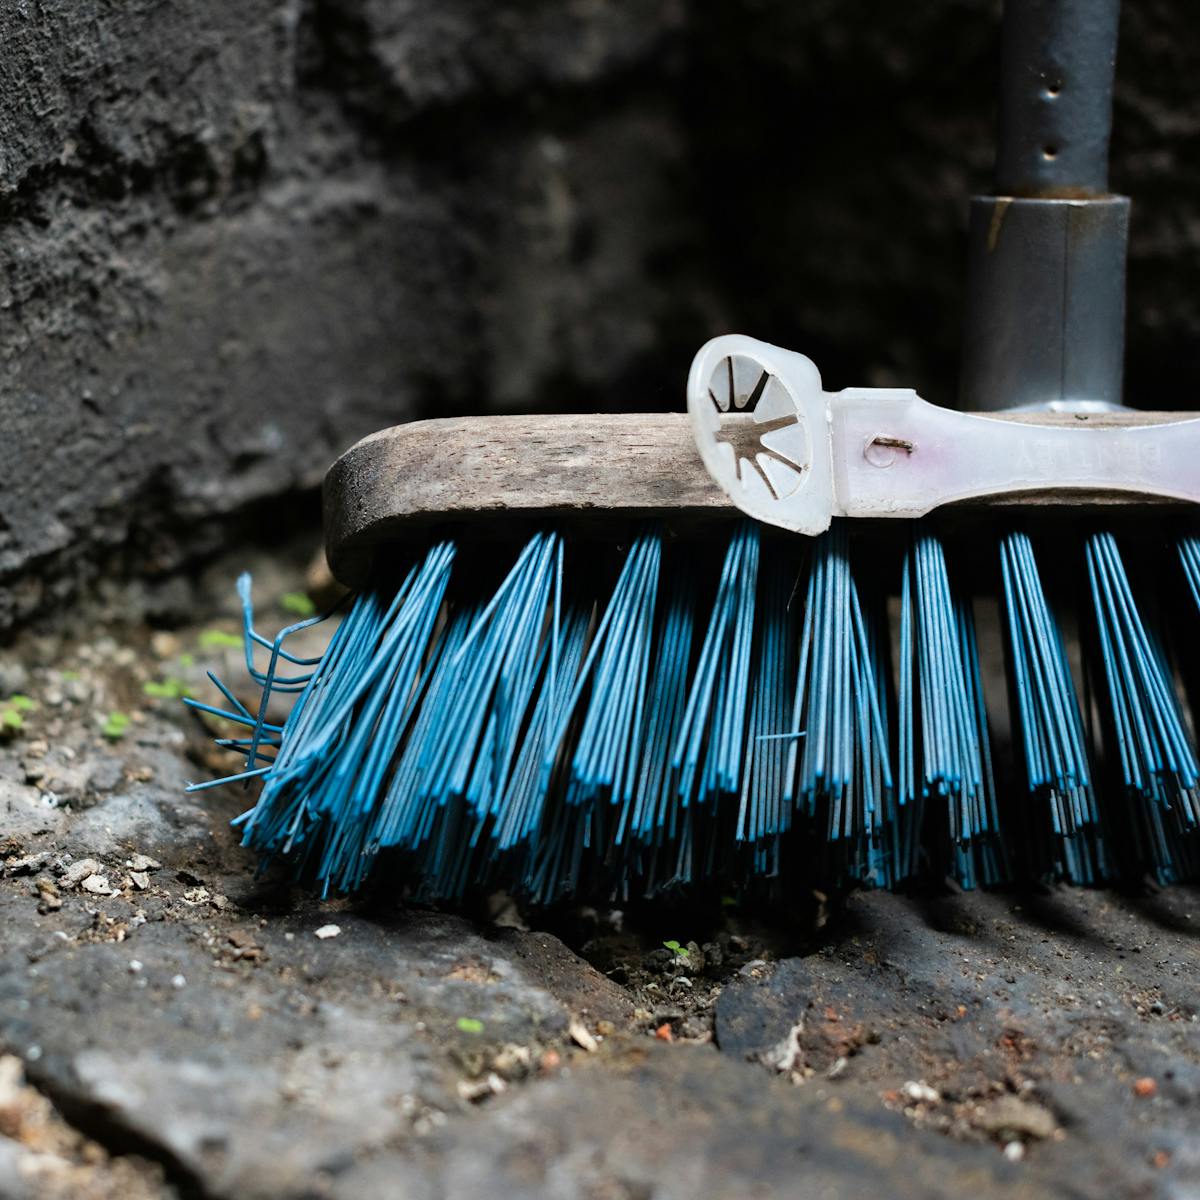 Photograph of a close-up of the head on a broom standing with its blue bristles on a brick floor. The broom is leaning against a black brick wall. Between the bricks on the floor can be seen small green sprouting leaves. Attached to the wood of the broom head is a plastic contraption with a star shaped hole, possibly for holding a cloth in place.